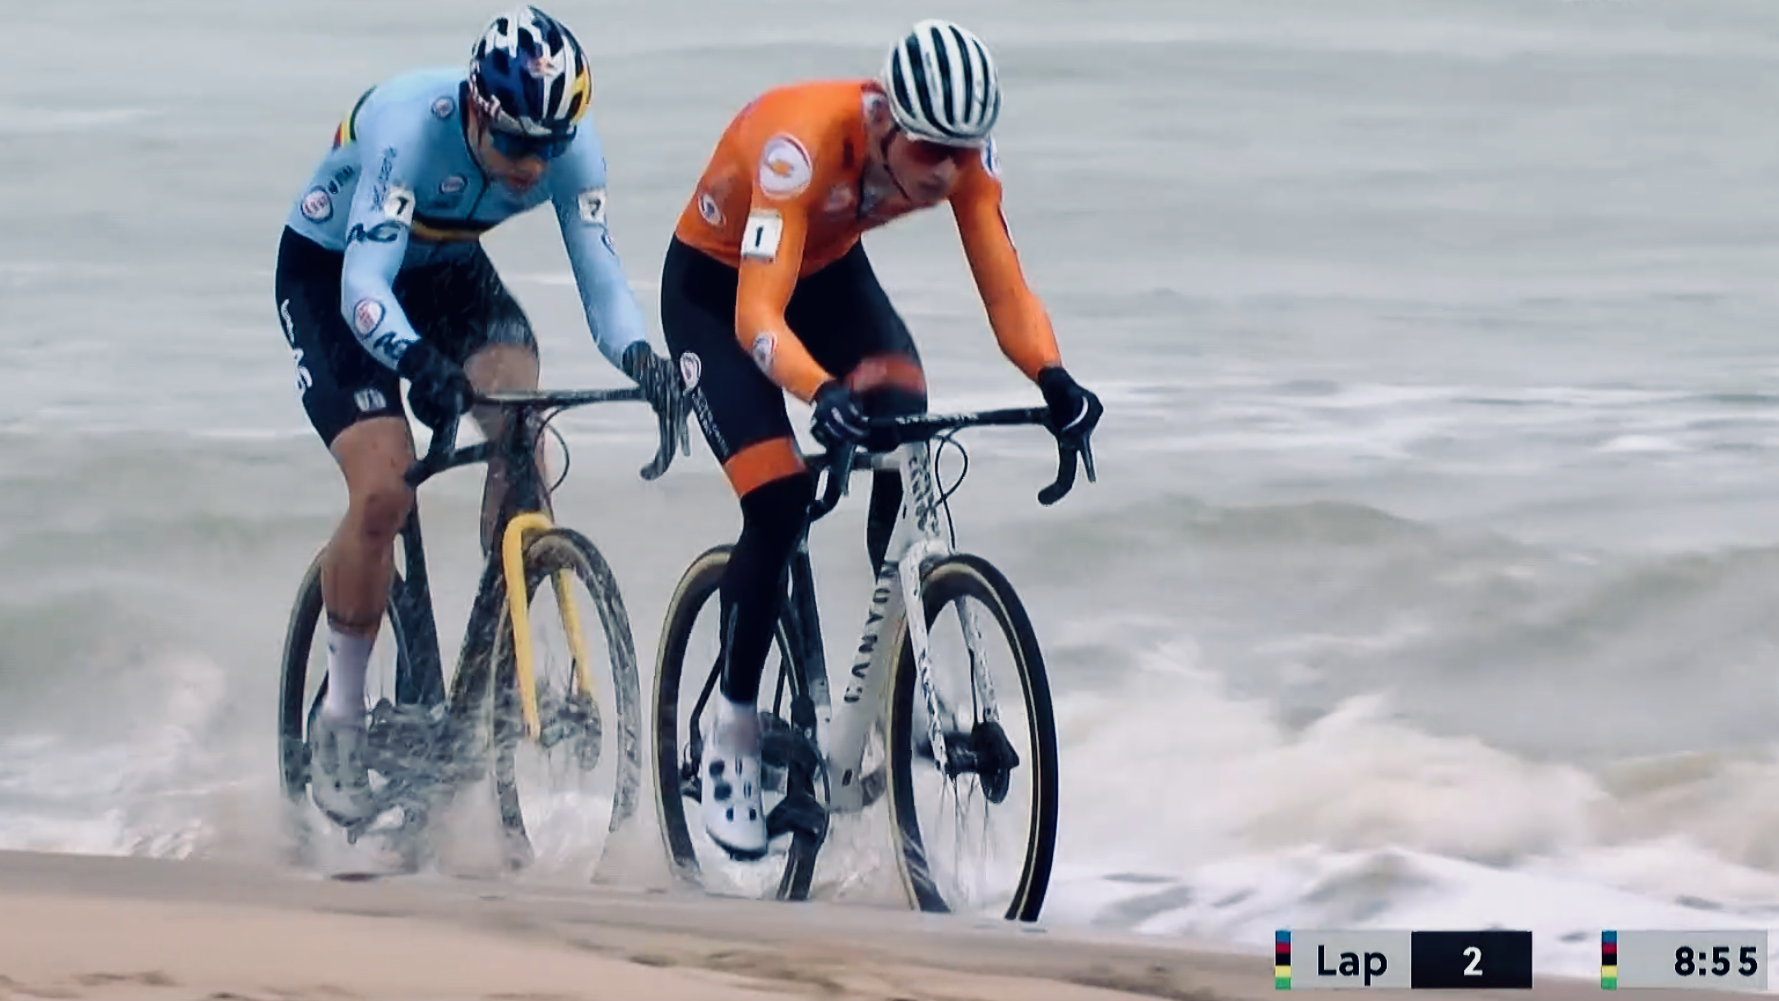 Dutch and Belgian cyclists racing through the waves